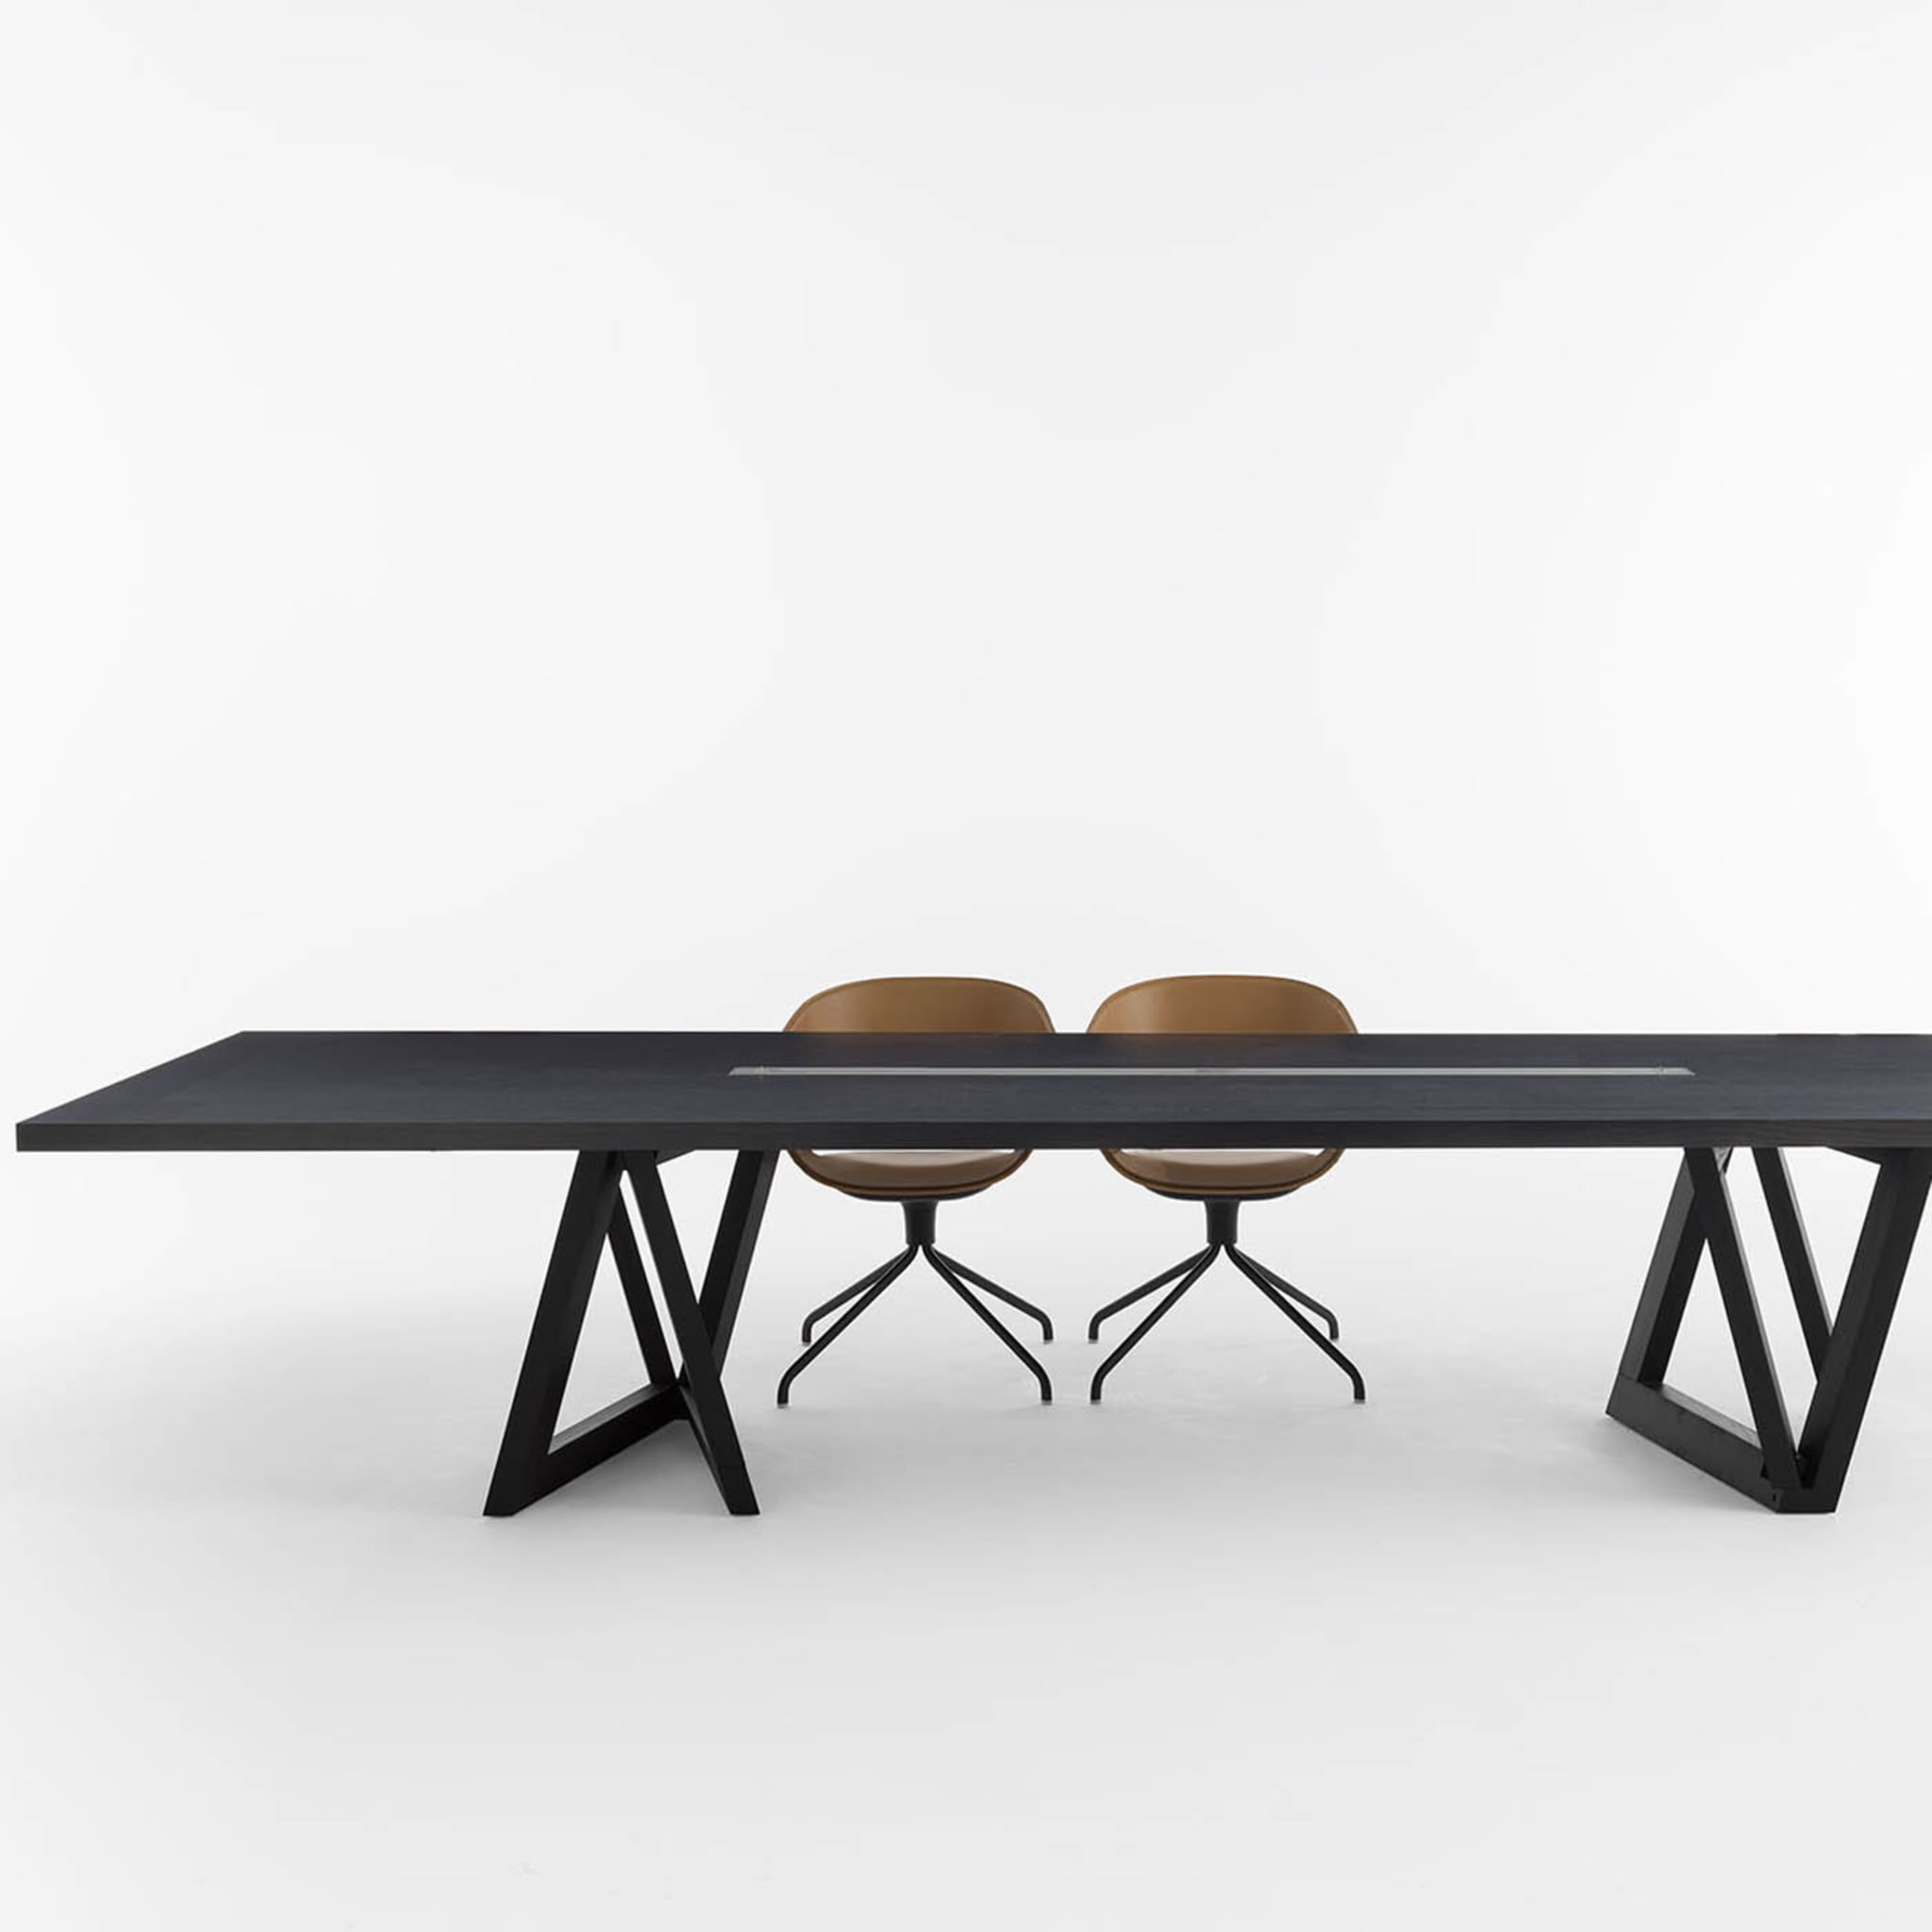 QuaDror 03 Dining Table by Dror - Alternative view 3